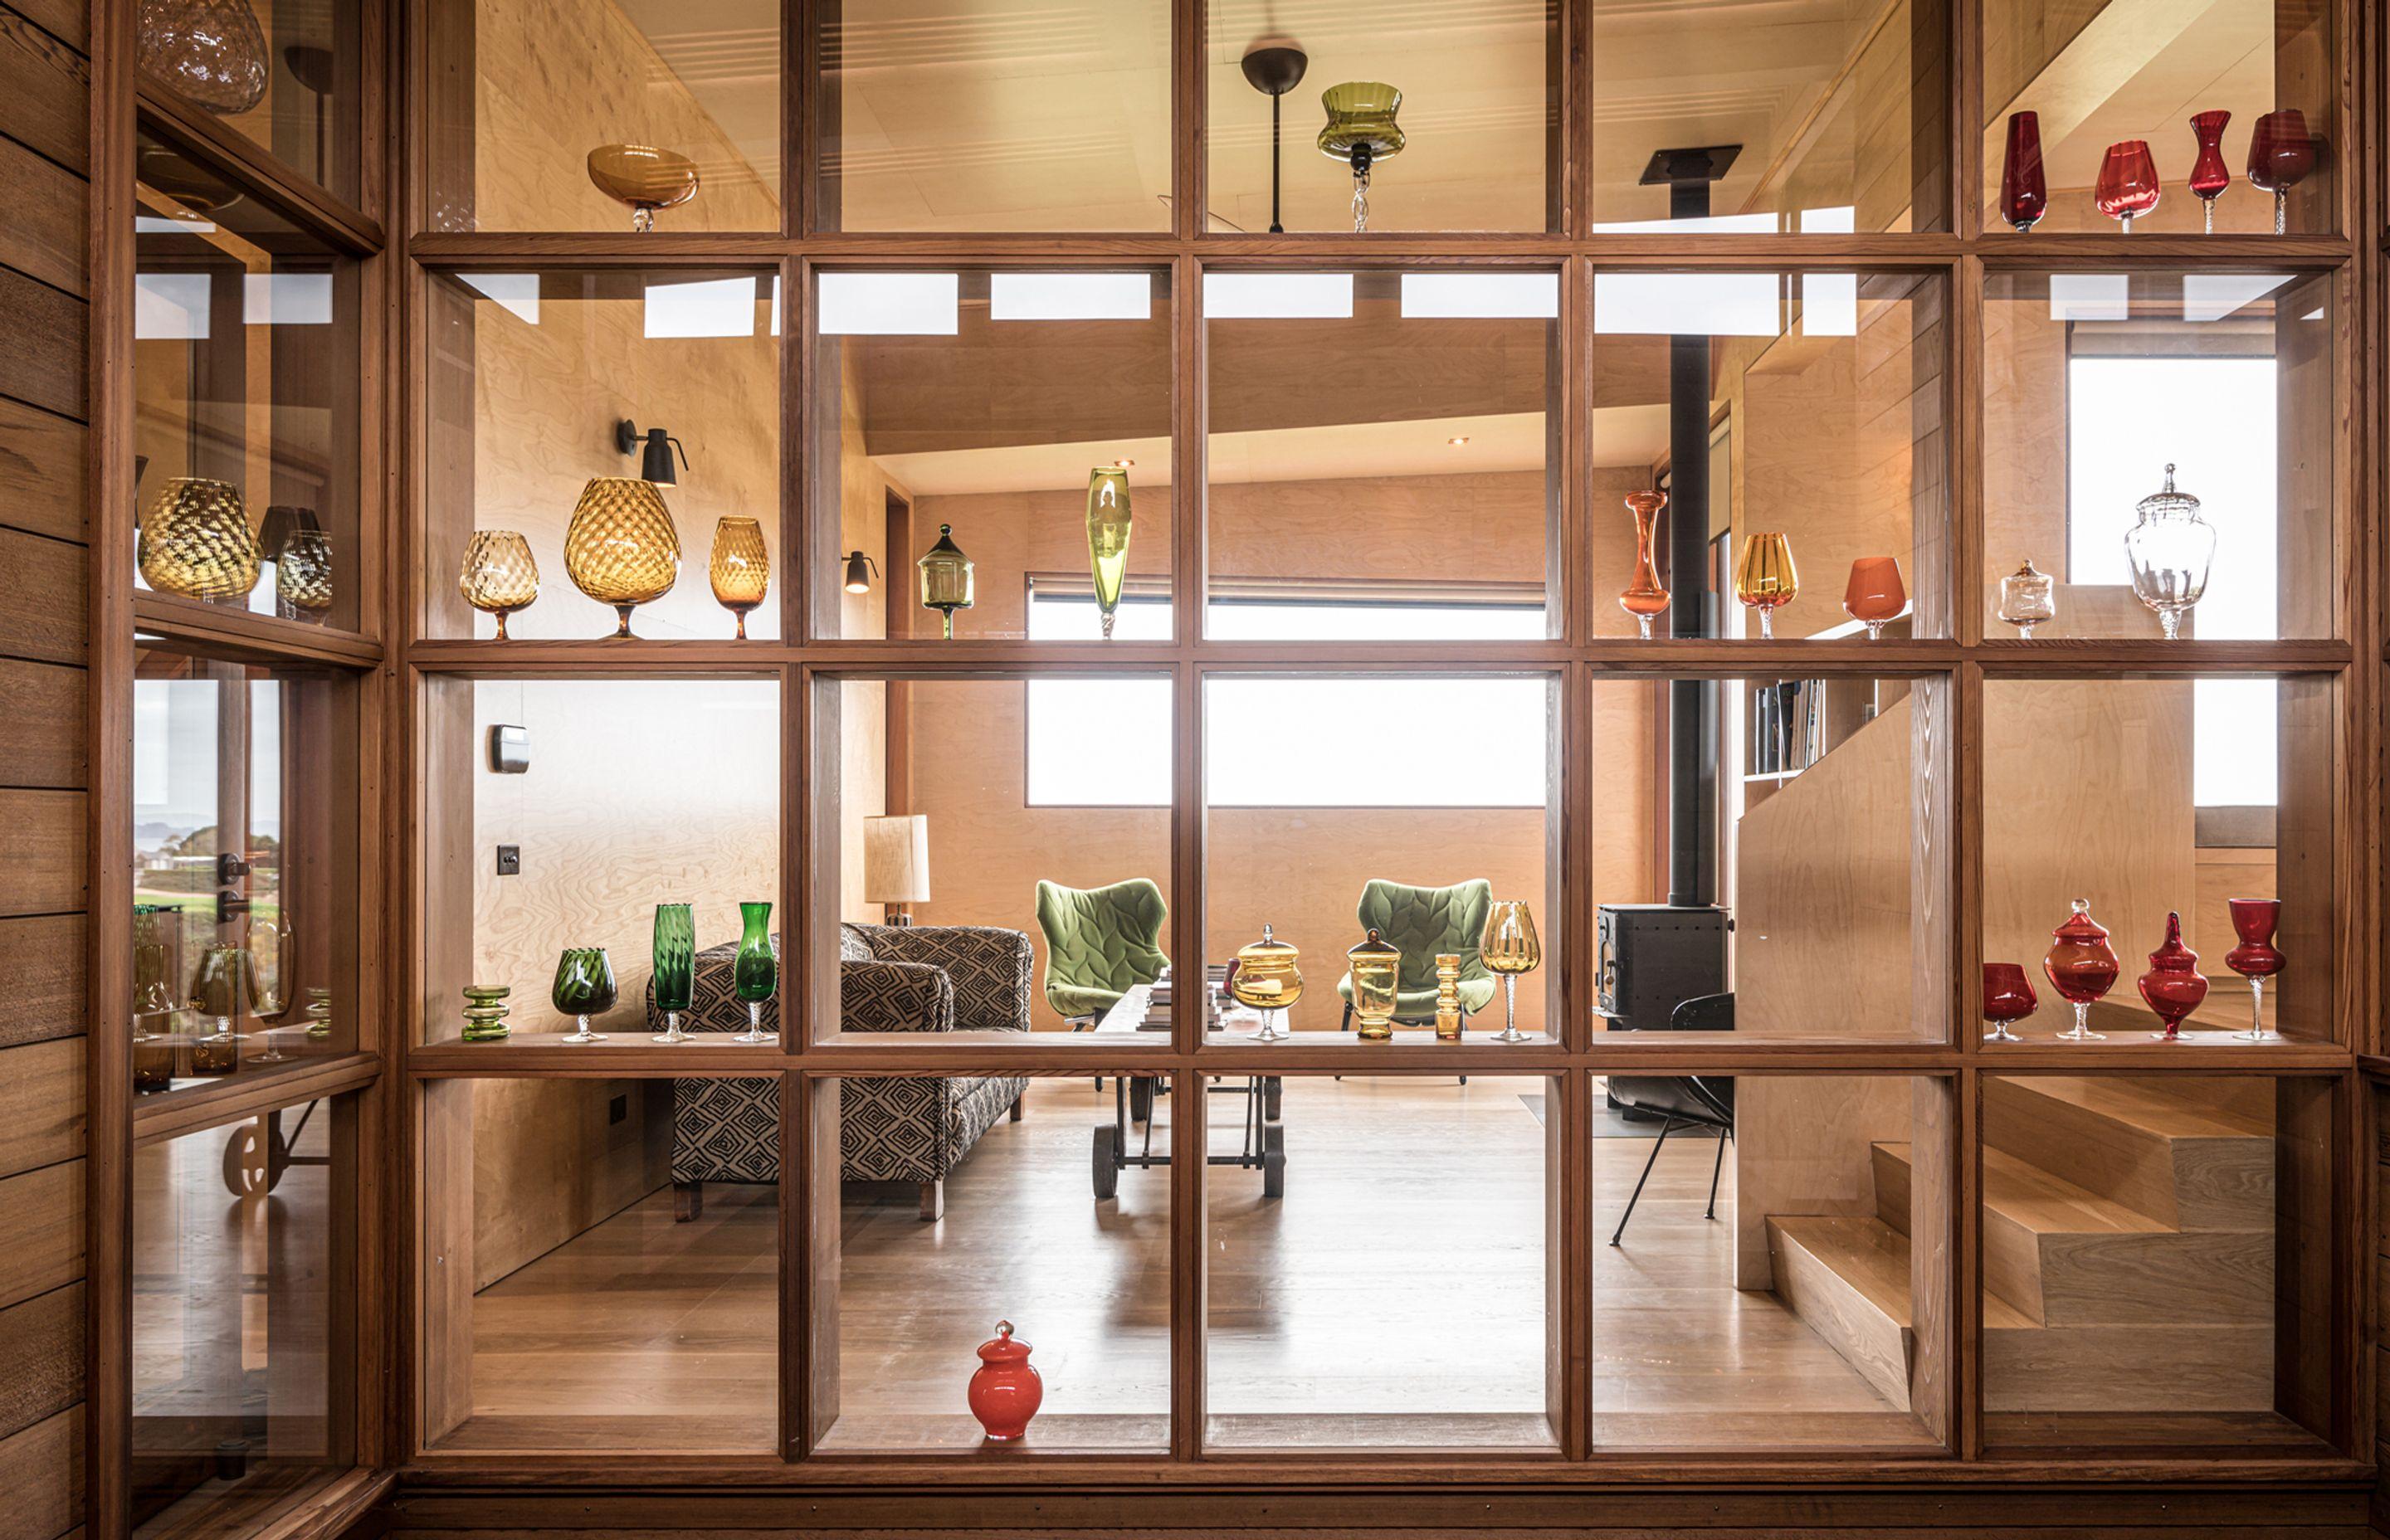 The owners’ glass art collection is showcased in this timber display case that forms the backdrop to both the courtyard and lounge. Photograph by ArchiPro.